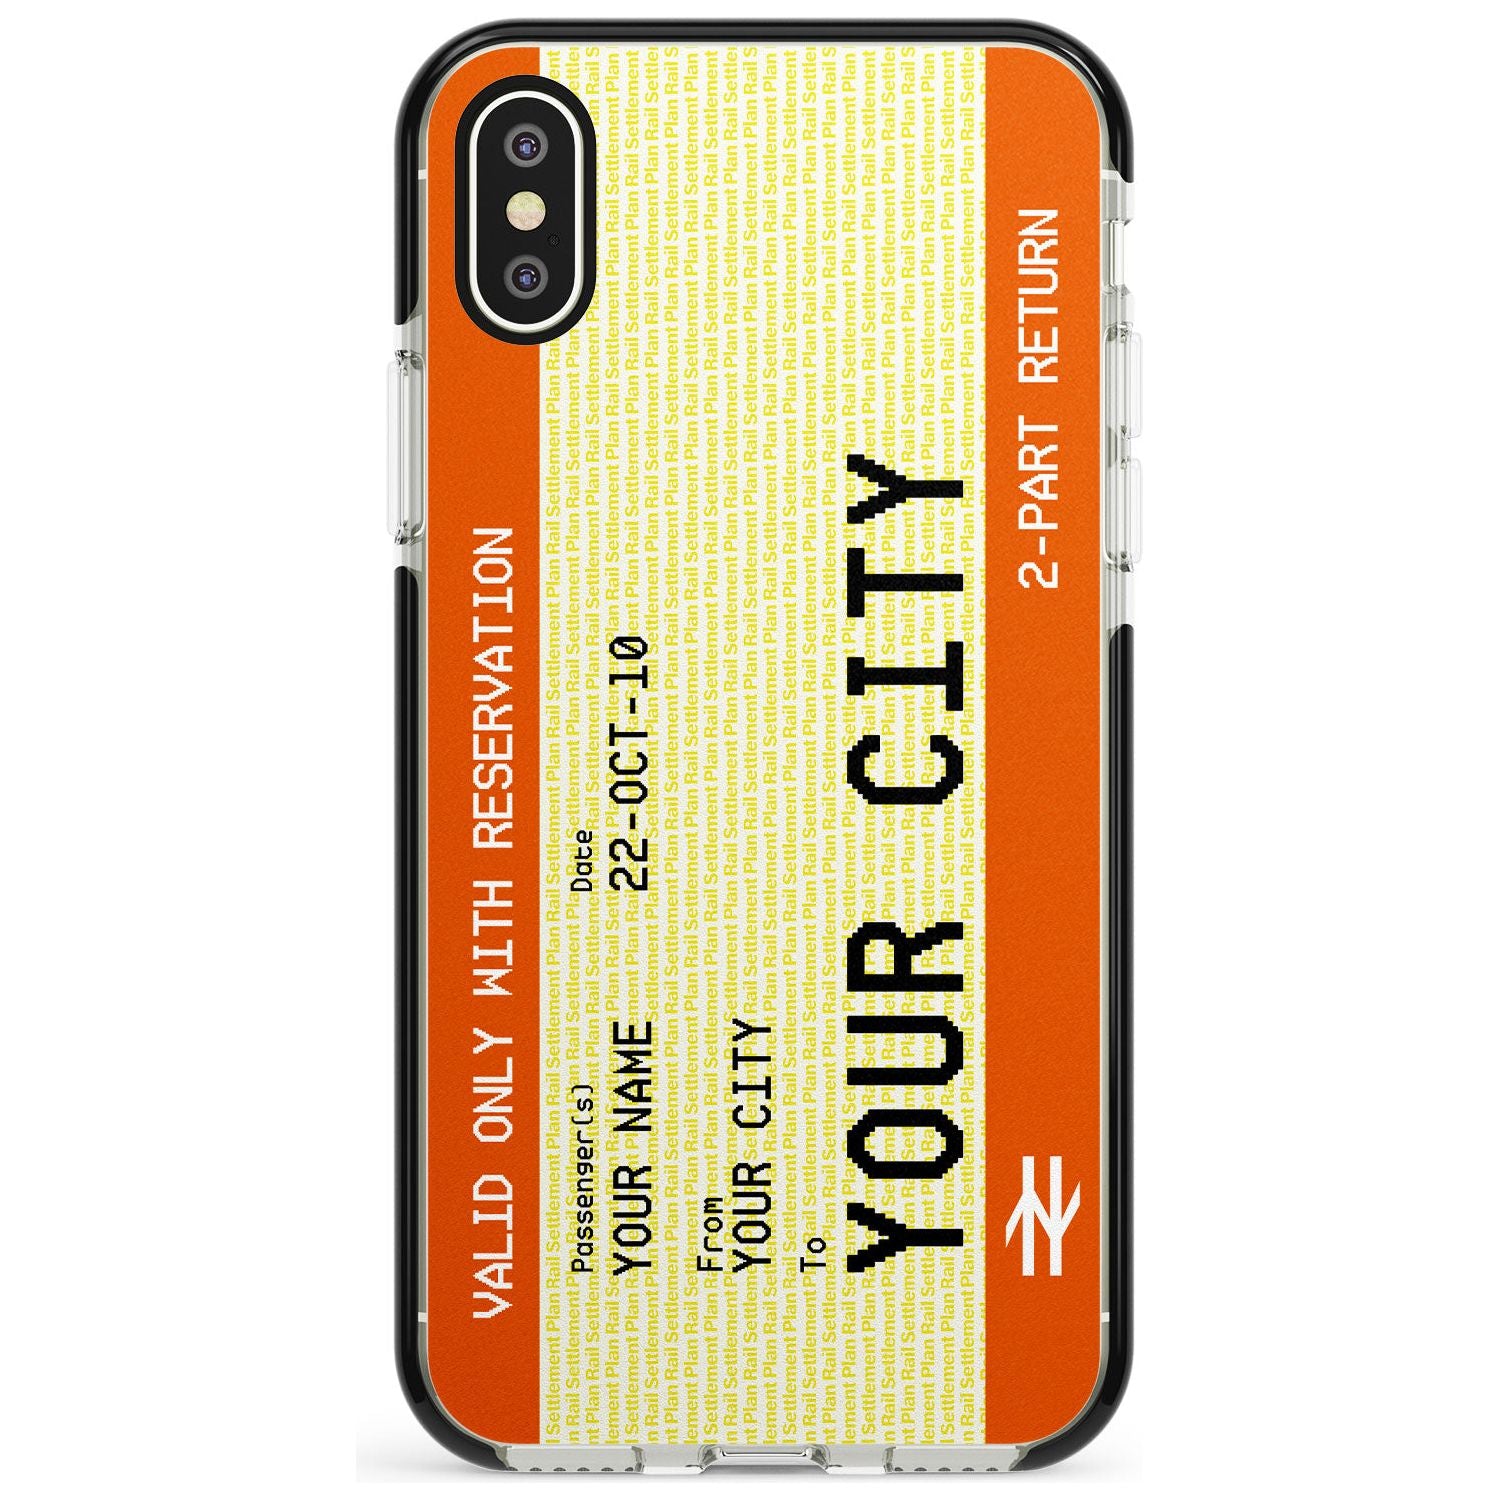 Personalised Create Your Own Train Ticket Black Impact Phone Case for iPhone X XS Max XR